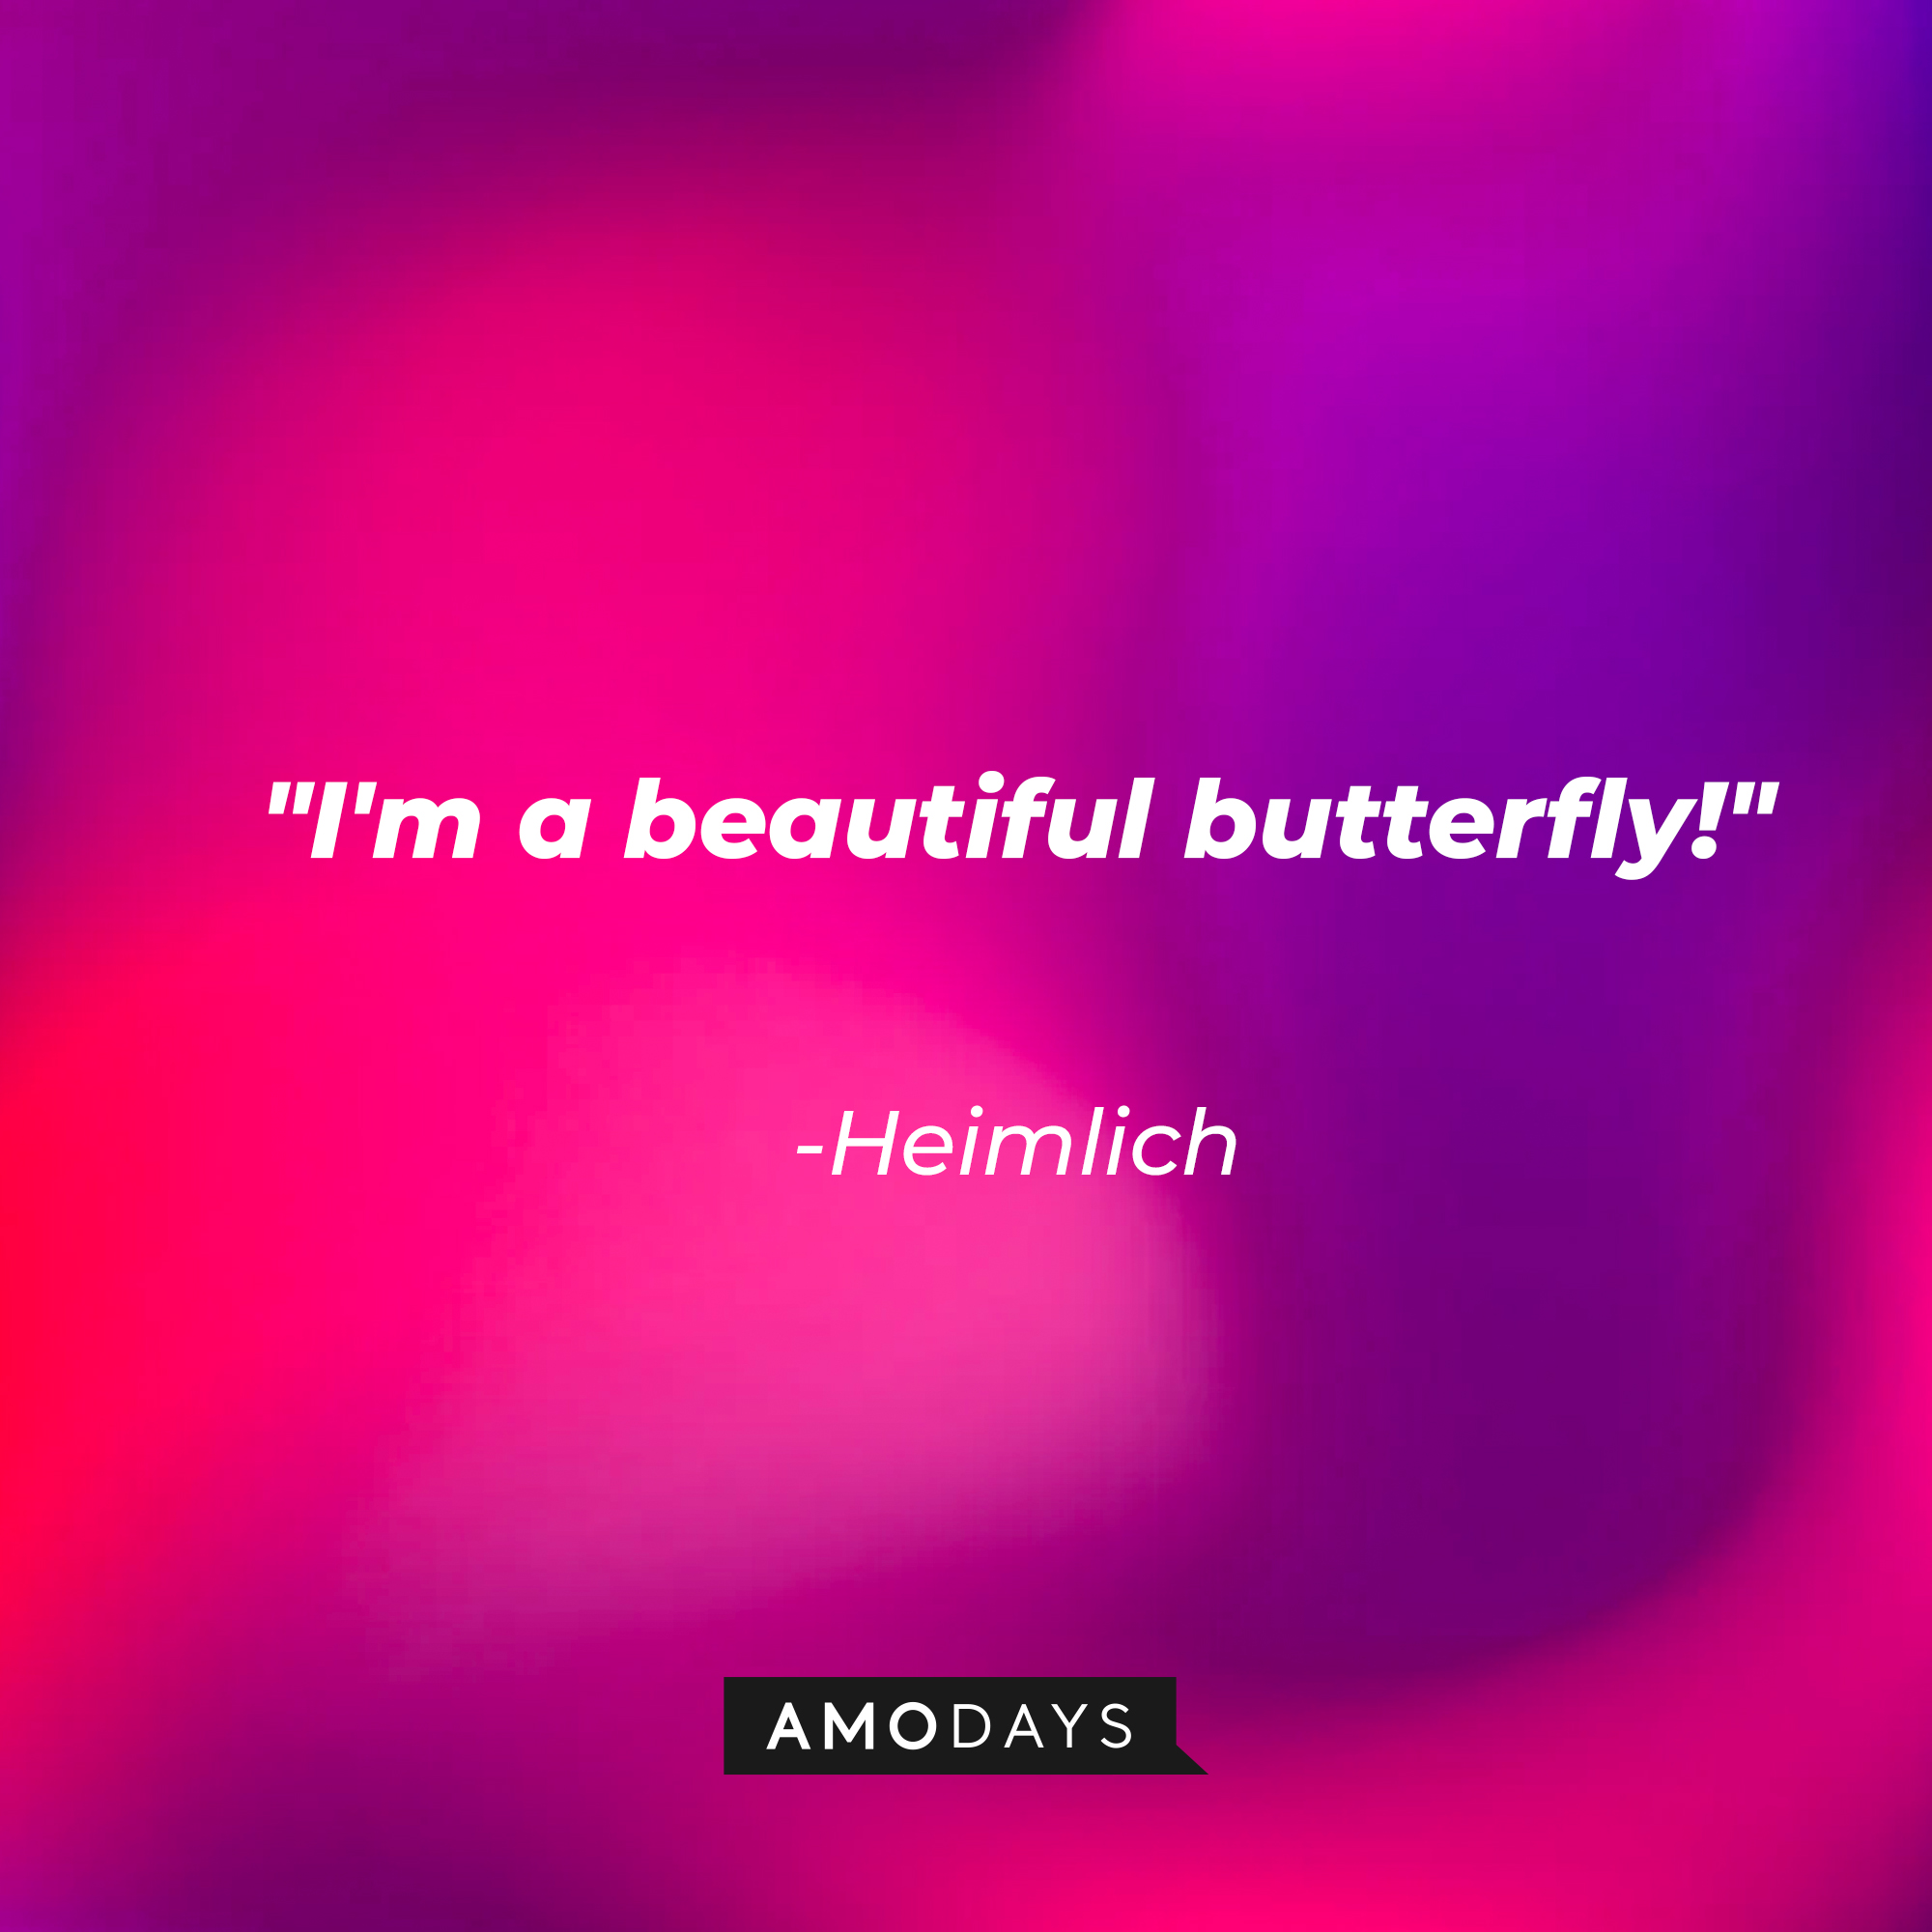 Heimlich's quote: "I'm a beautiful butterfly!" | Source: AmoDays